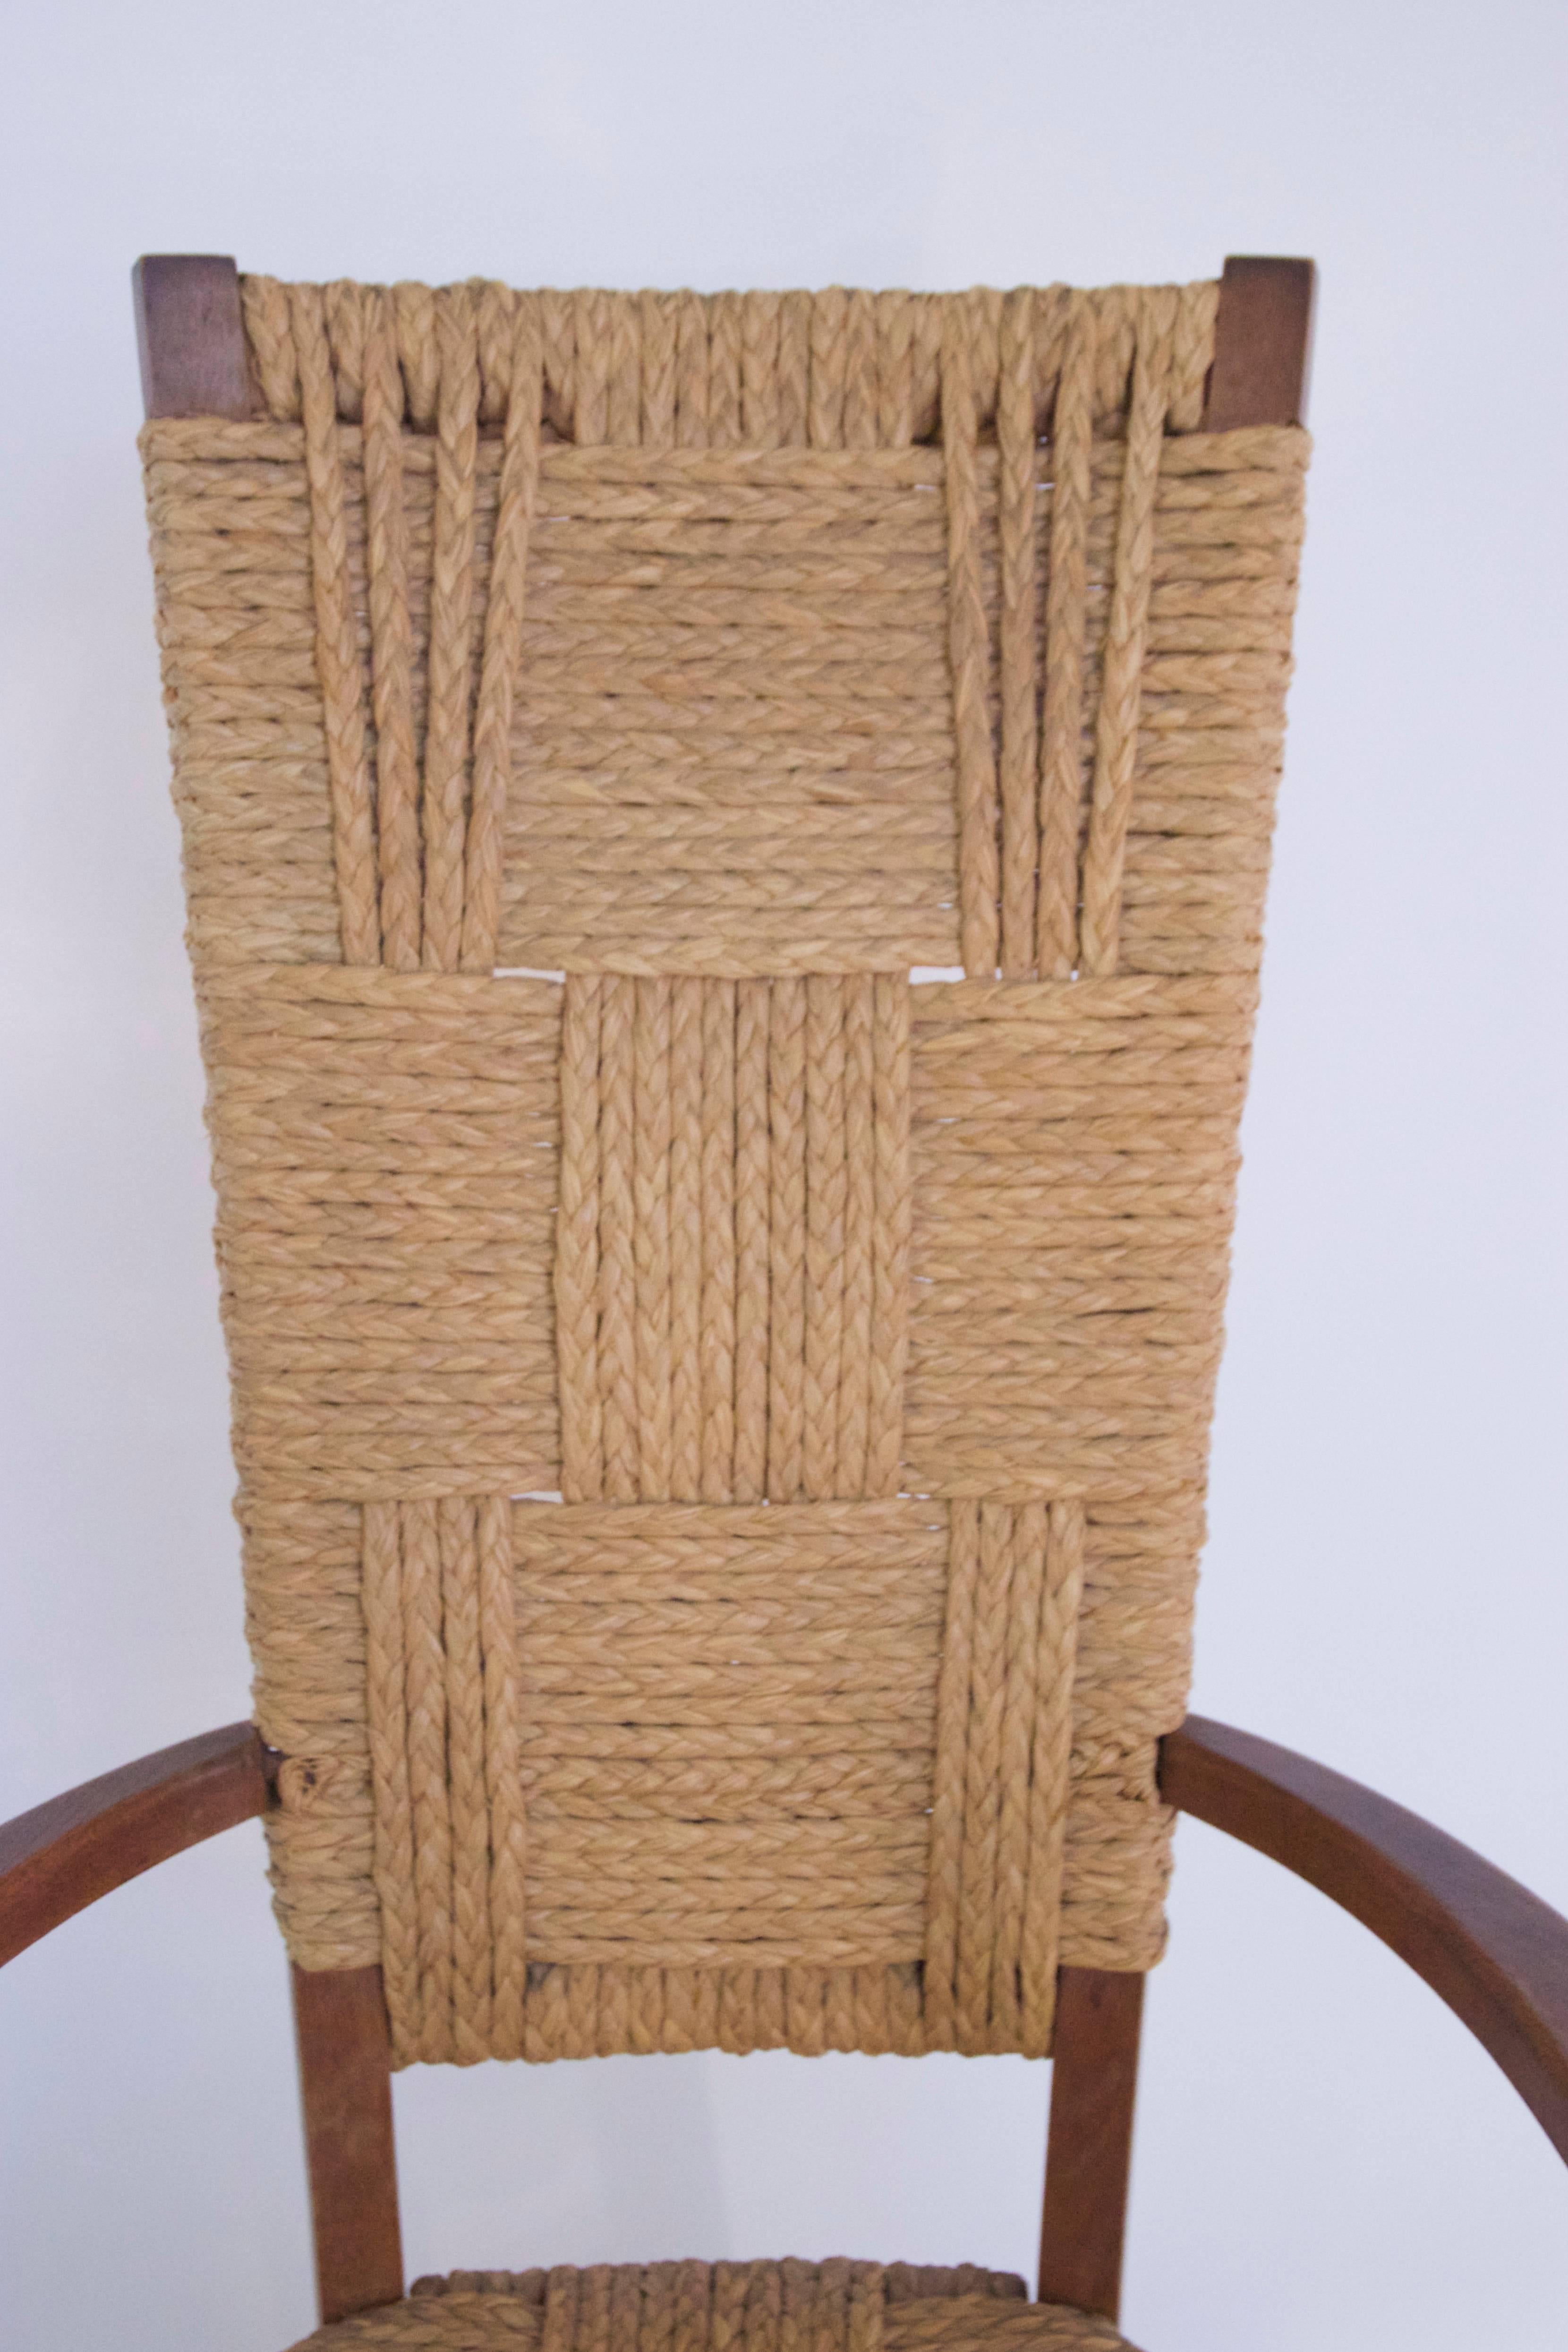 Audoux-Minet, suite of four armchairs,
Rattan and wood, 
circa 1970, France. 
Measures: Height 110 cm, seat height 45 cm, width 56 cm, depth 40 cm.